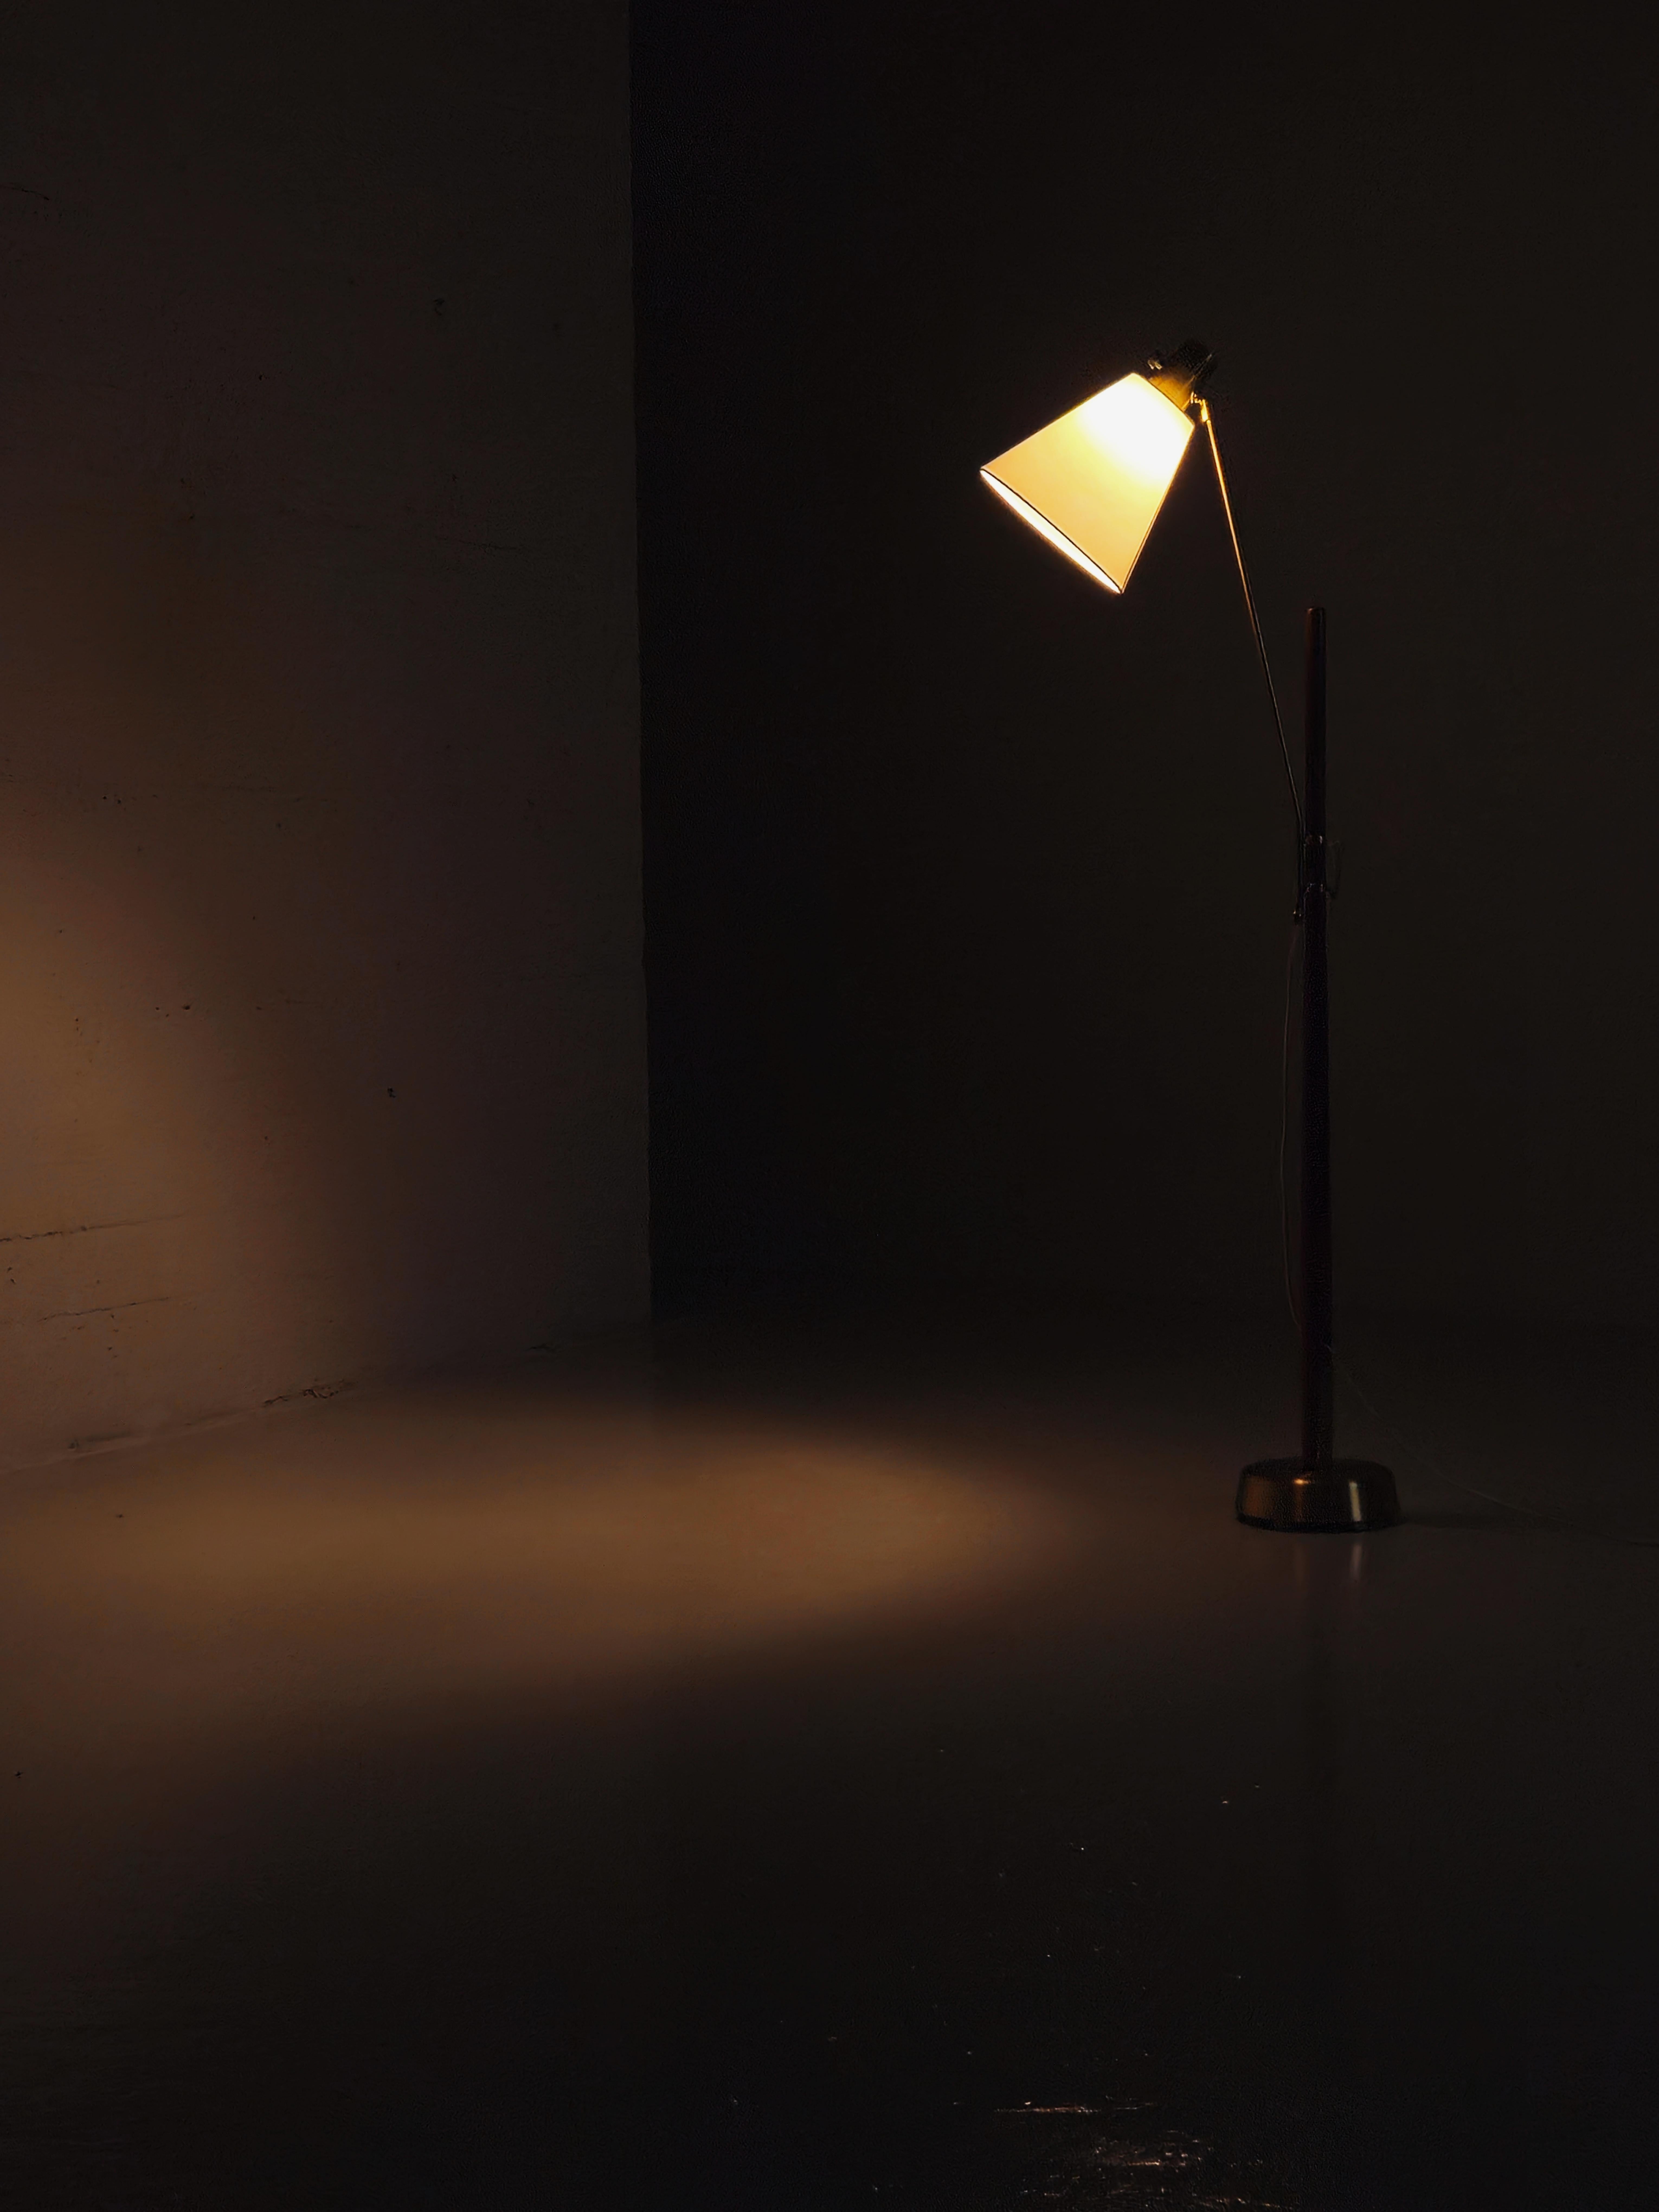 Hans Bergström floor lamp model '539'. Produced by Ateljé Lyktan, Åhus during the 1940-50s. 

Made in teak and brass. Adjustable height from 120 to 150 cm. 